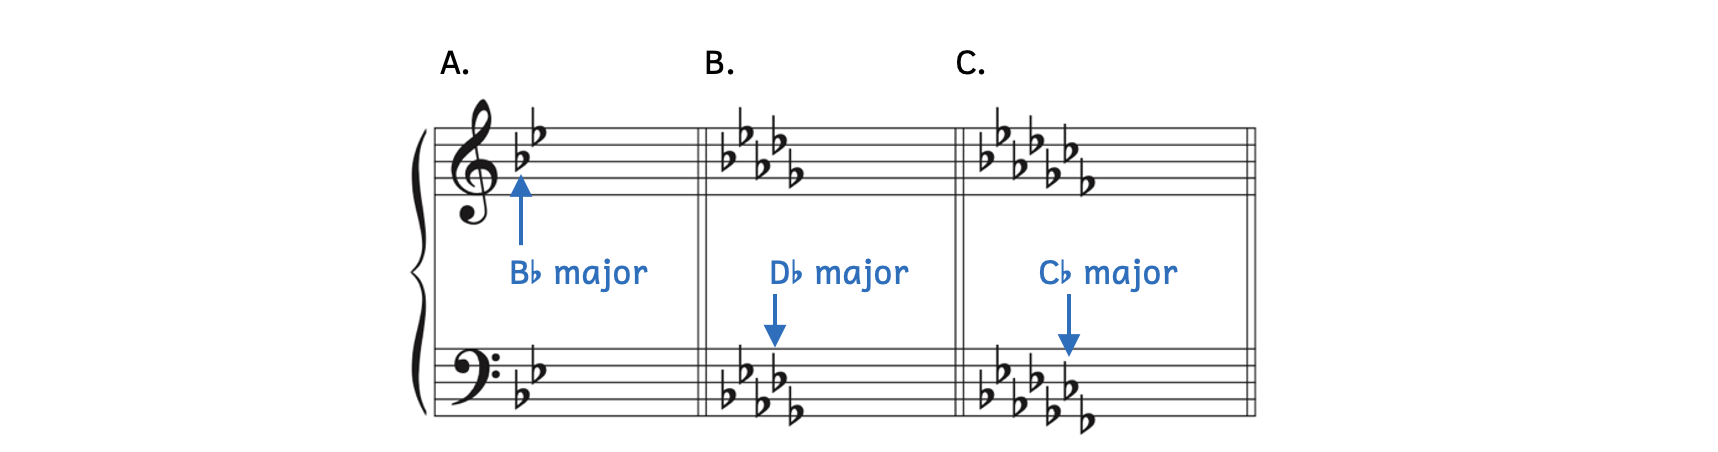 Shortcut for identifying major keys with flats. In Example A, the penultimate flat is B-flat, so the key is B-flat major. In Example B, the penultimate flat is D-flat, so the key is D-flat major. In Example C, the penultimate flat is C-flat, so the key is C-flat major.